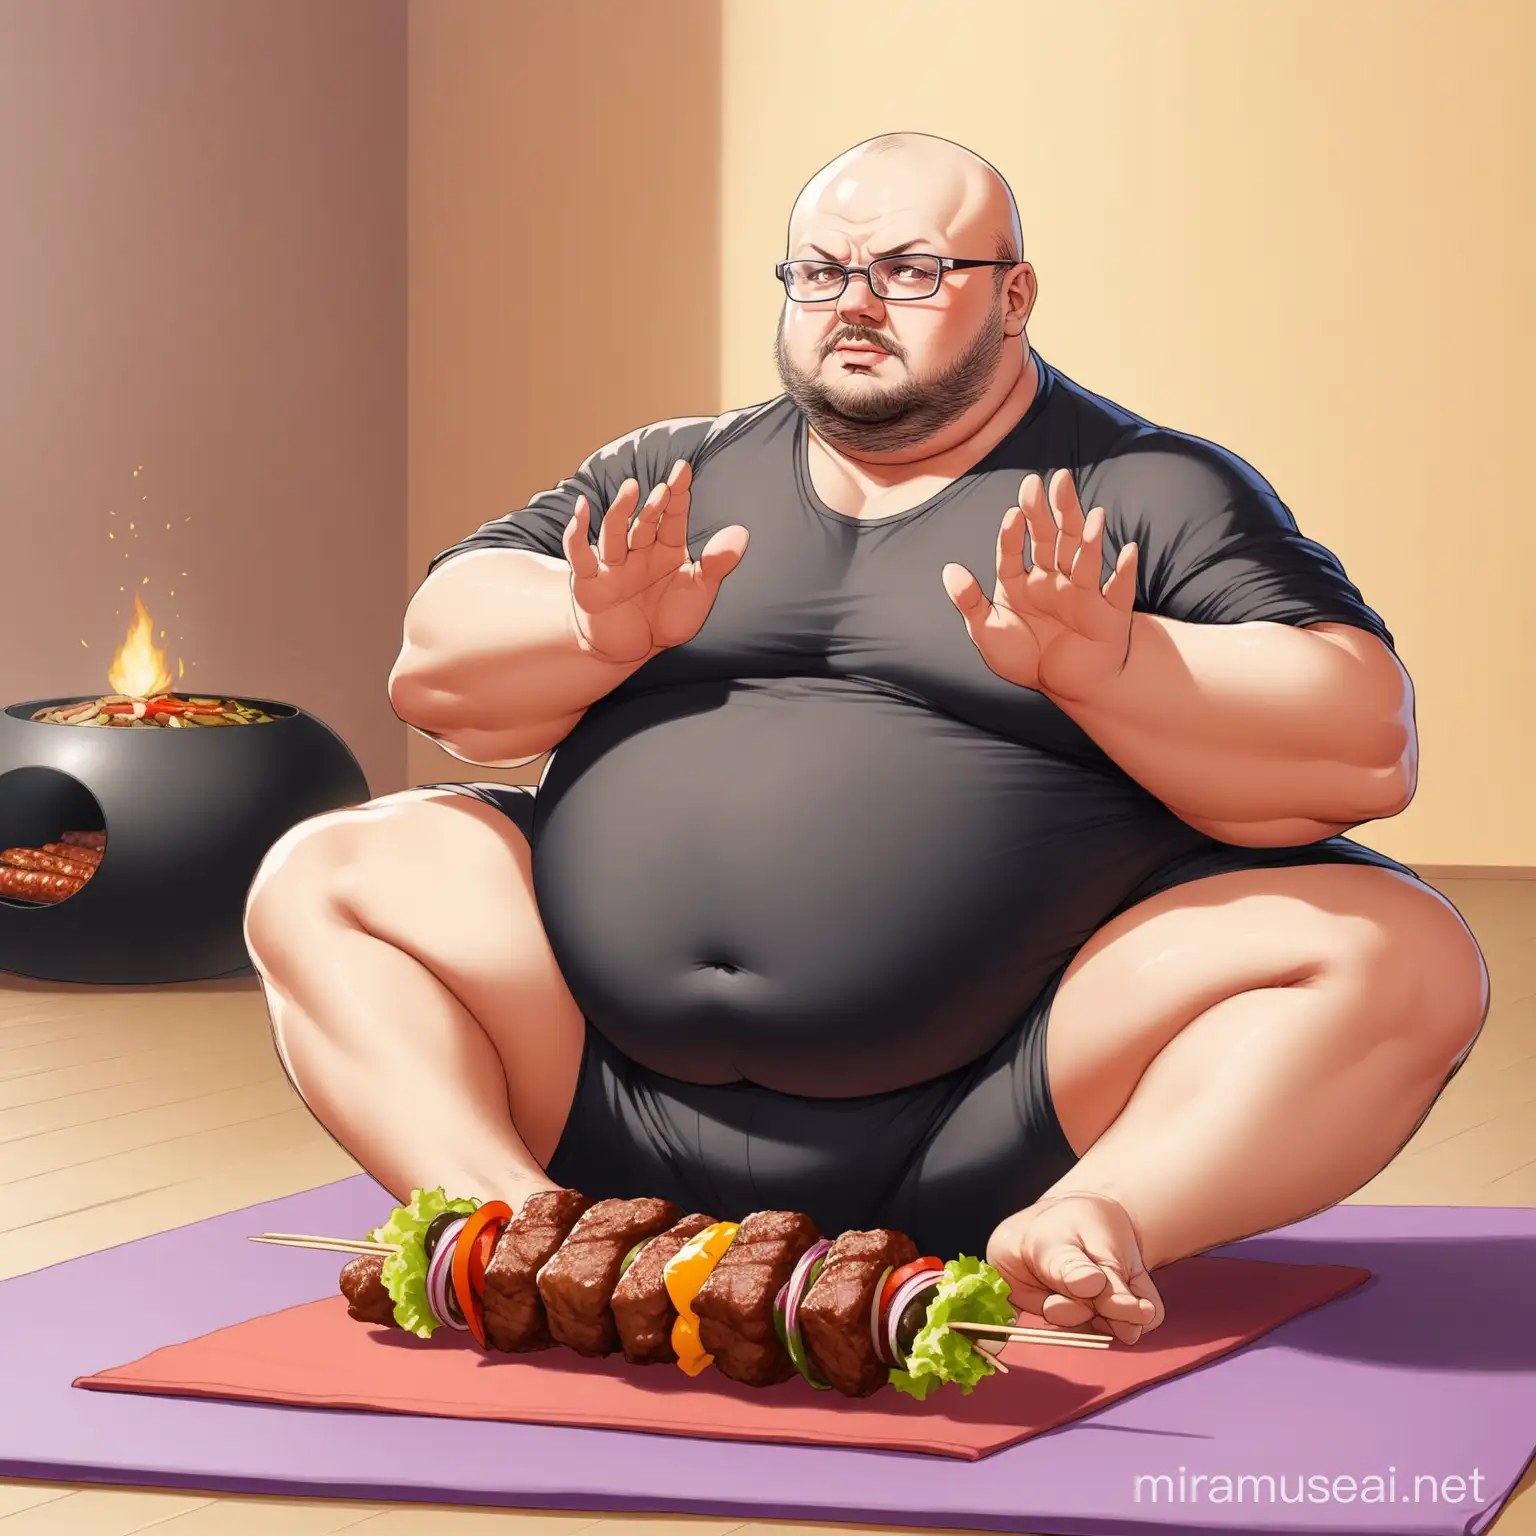 balding, overweight slavic man, with glasses spread eagled on the ground at yoga with kebab